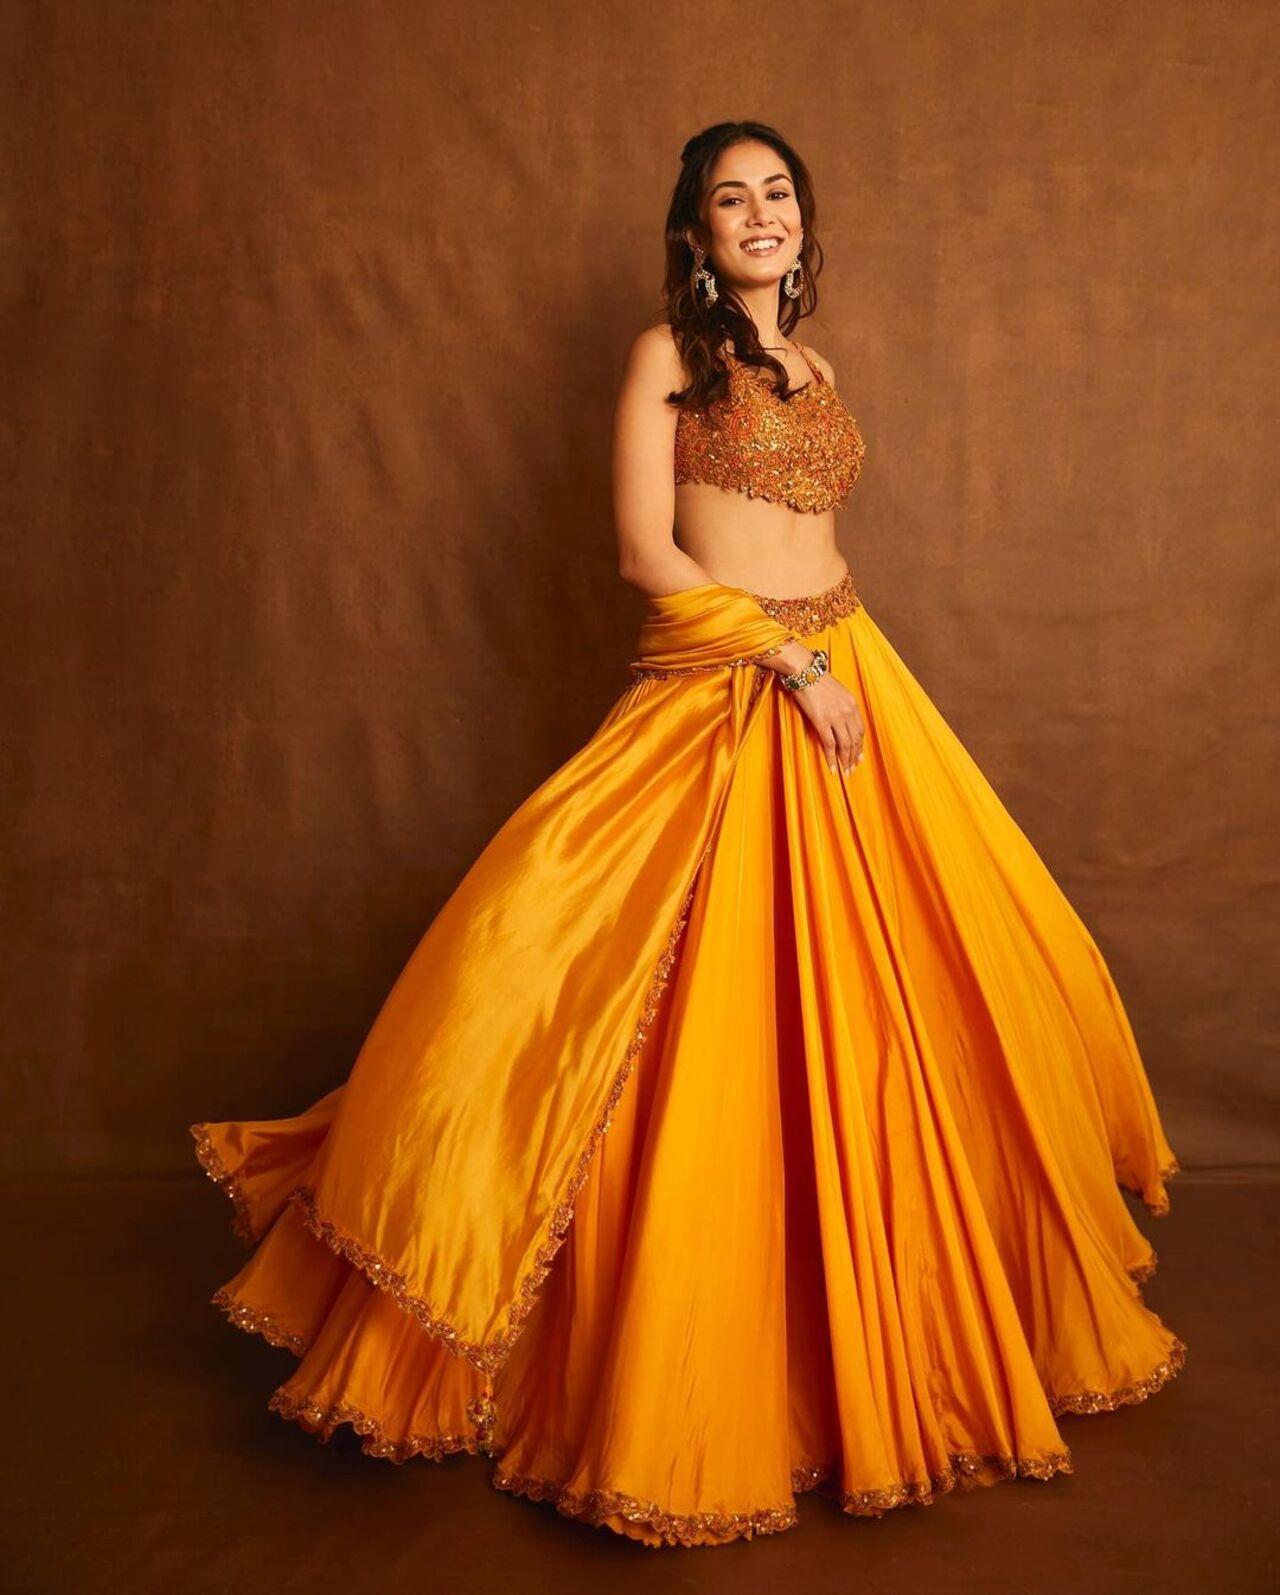 Mira Rajput stunned in a 'ladoo peela' lehenga. She went minimal with the jewellery for a Diwali party